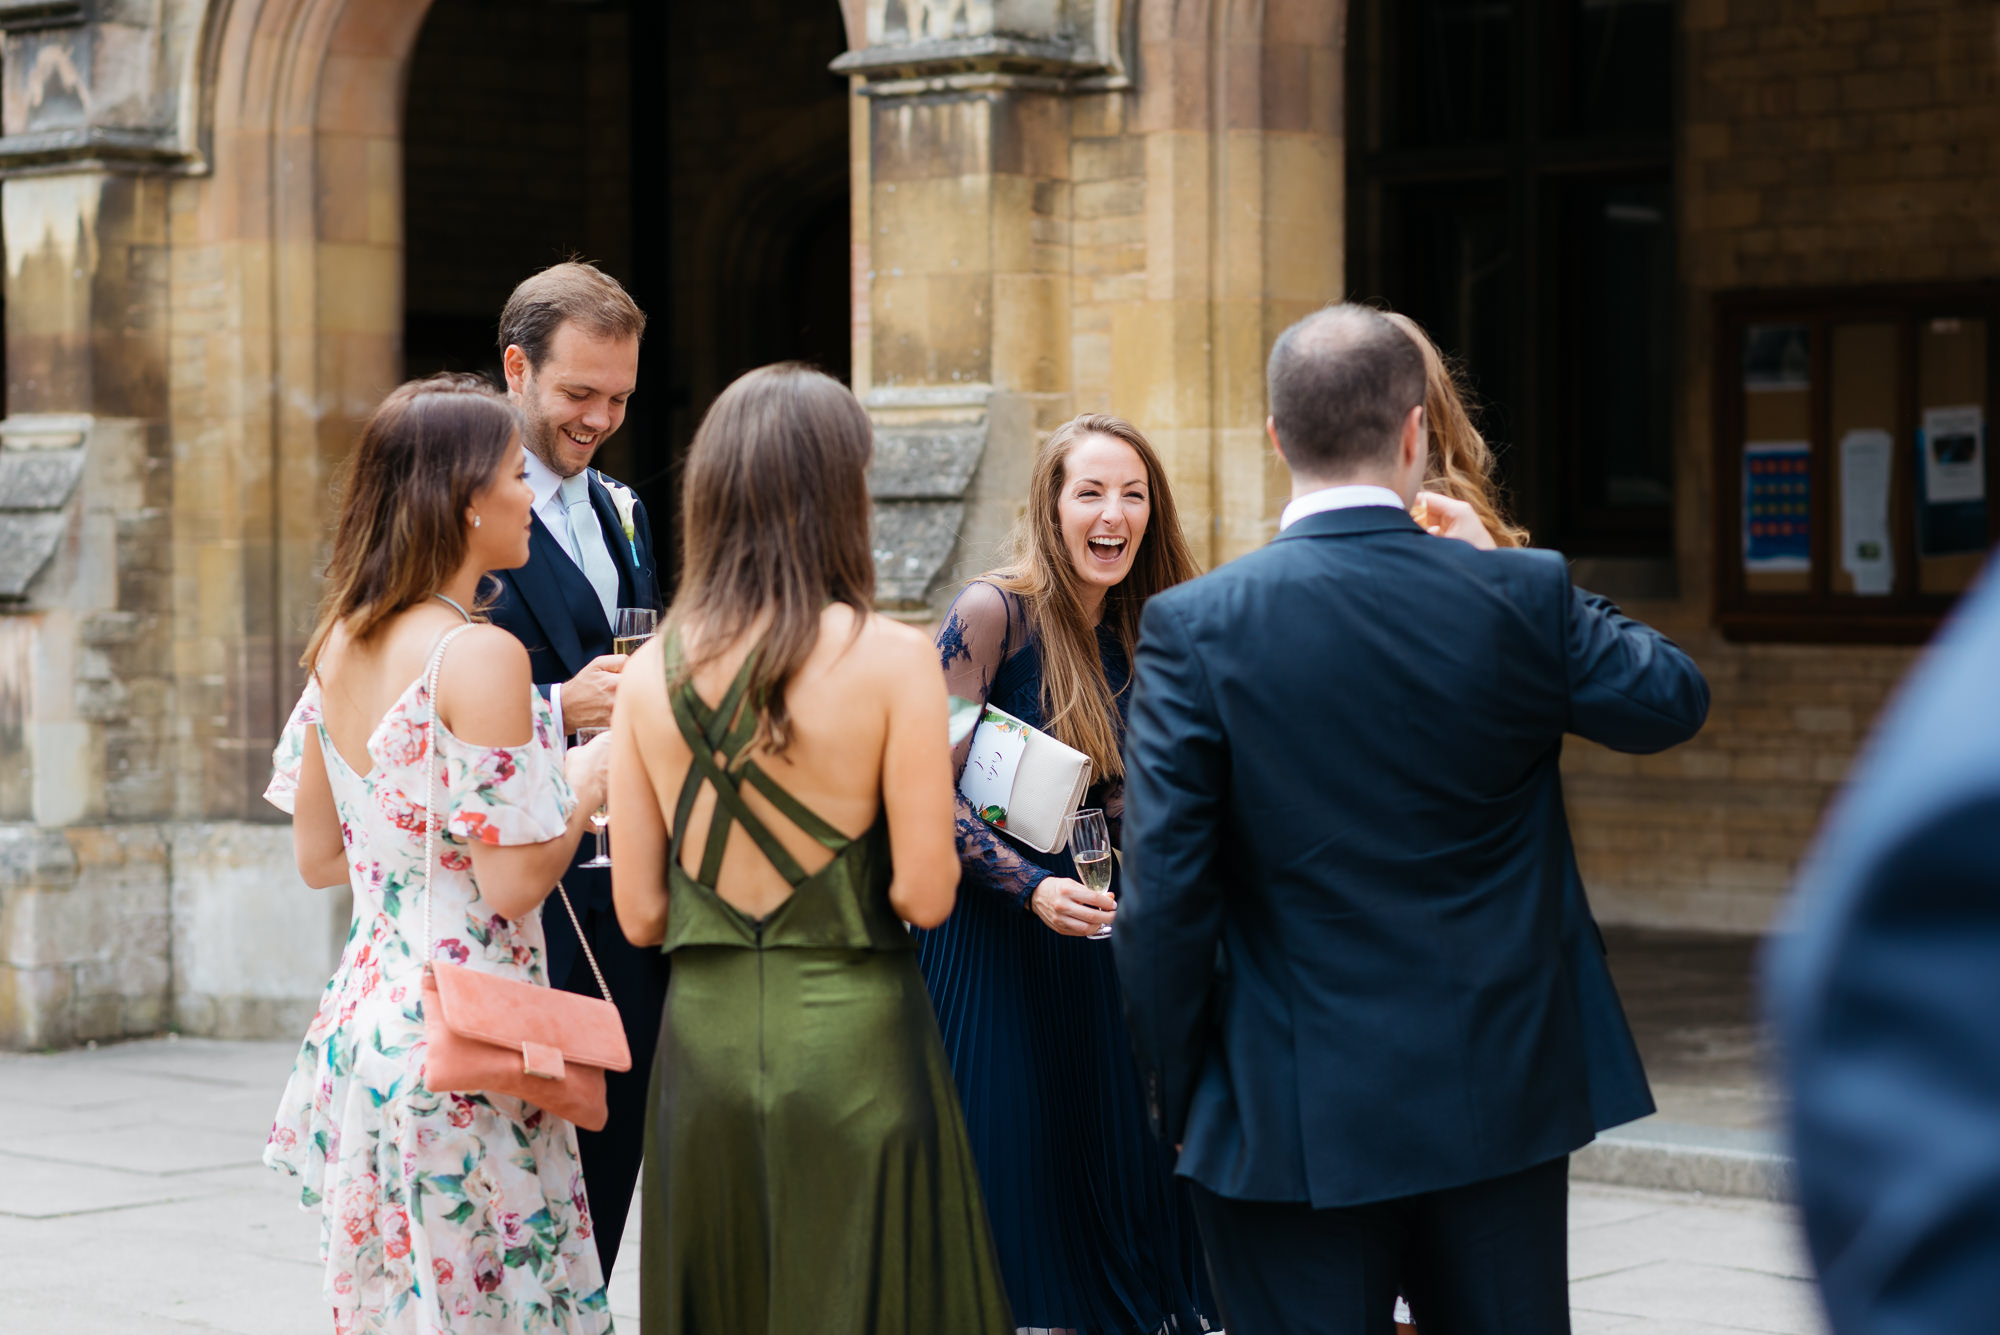 Wedding guests at Cloisters wedding in Oundle